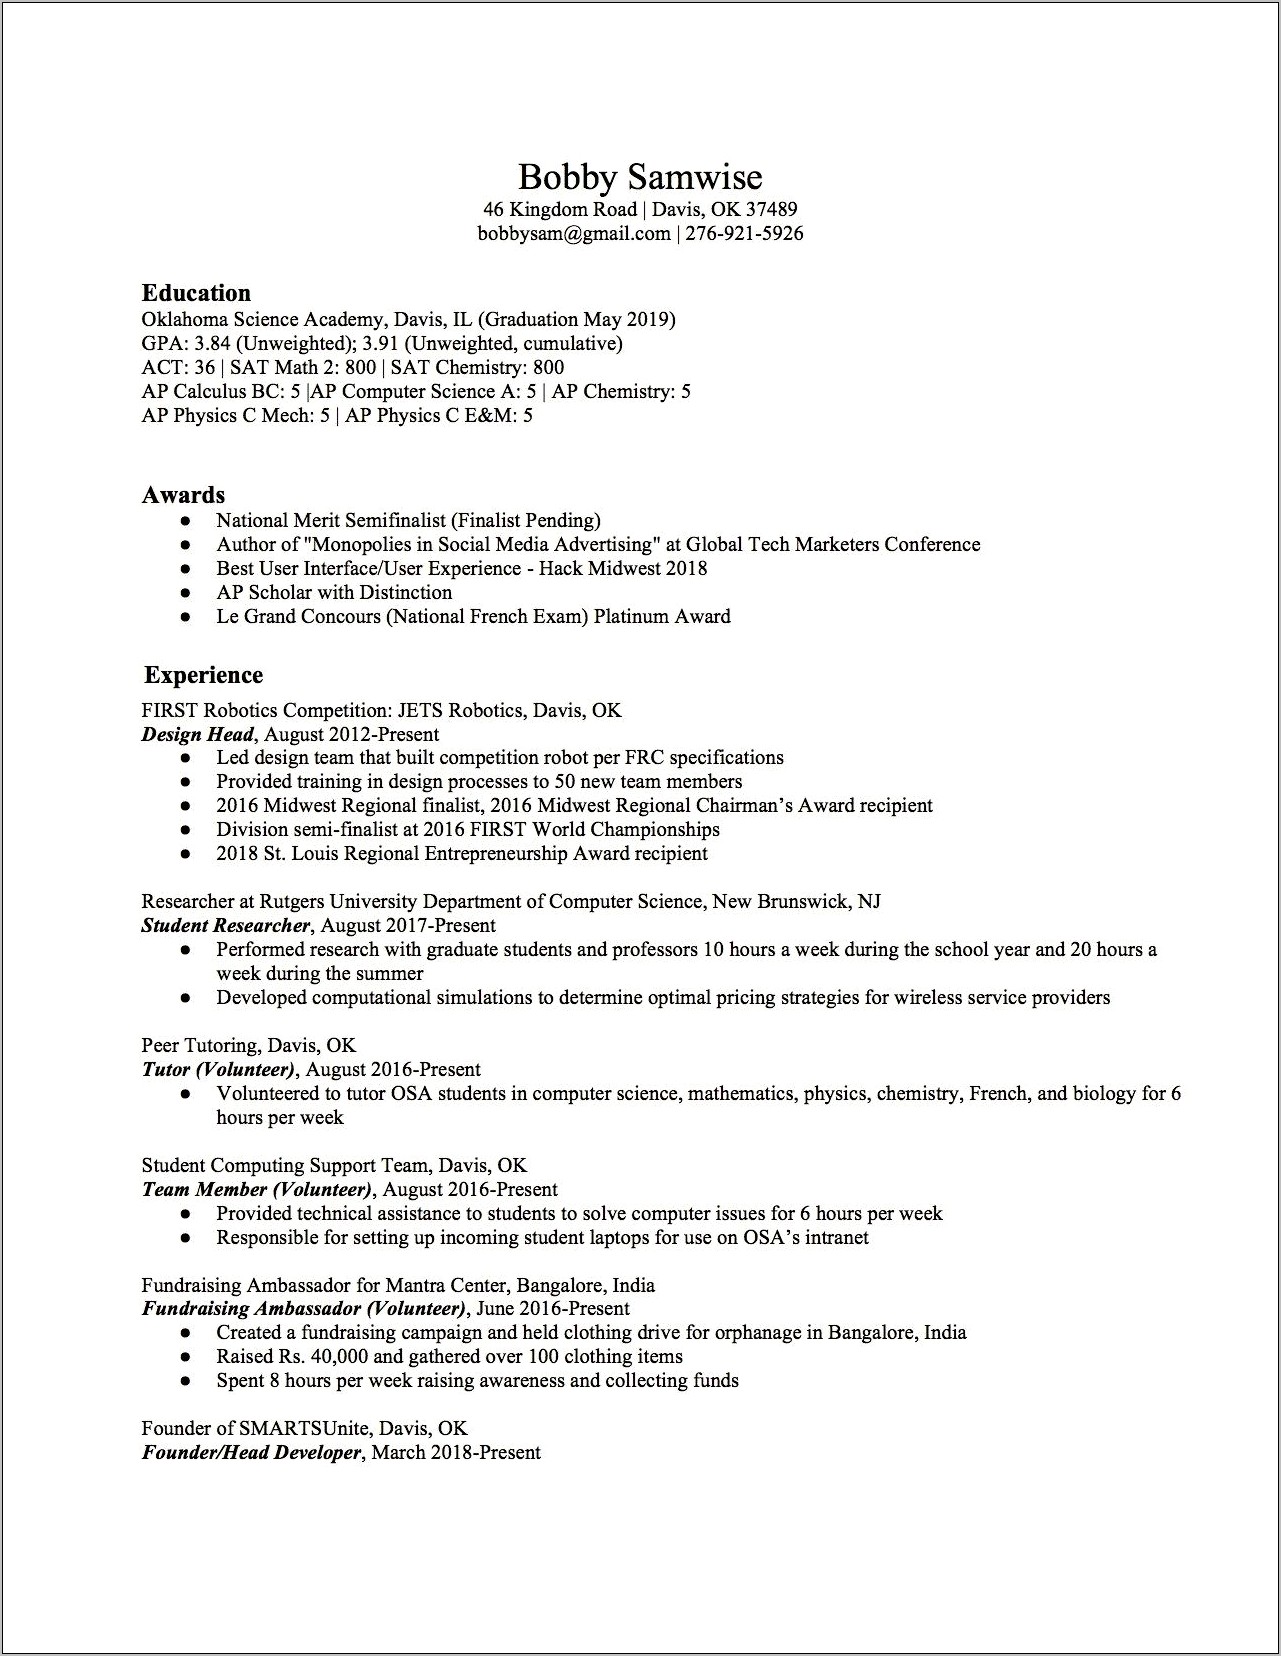 Education Section Of A Graduate School Resume